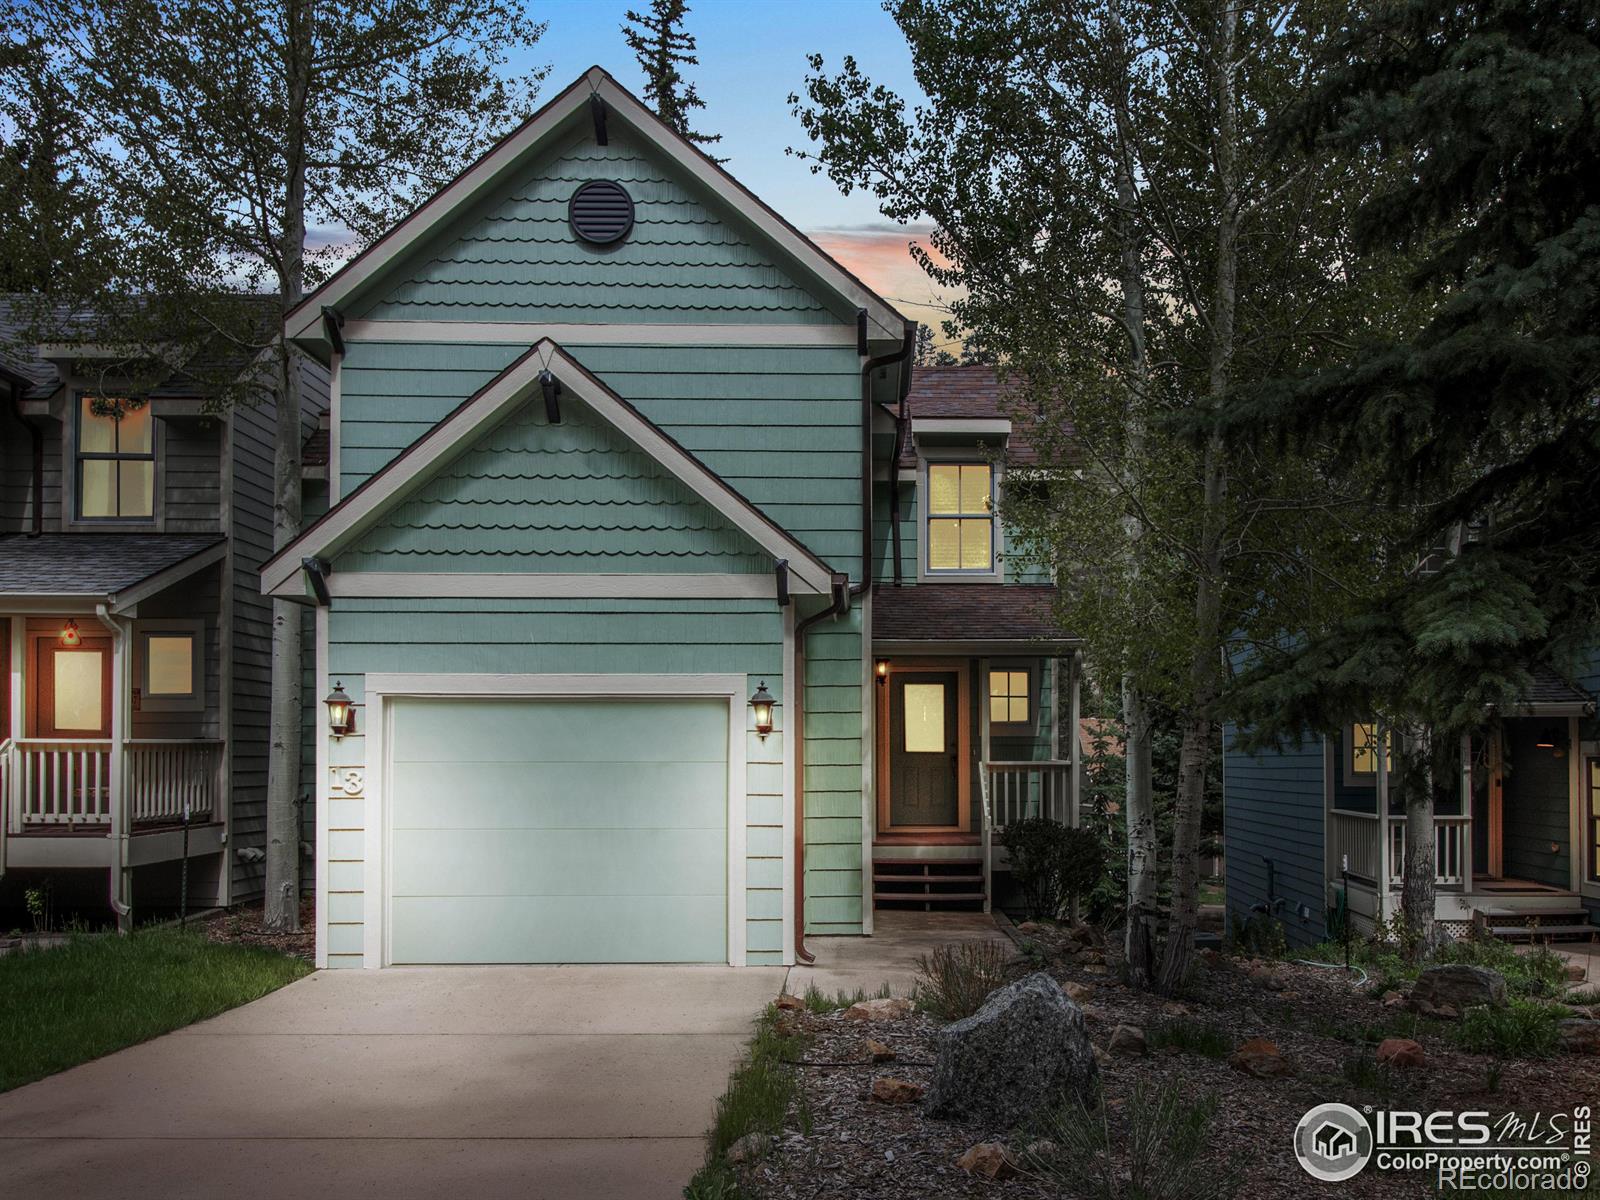 2222  highway 66 , Estes Park sold home. Closed on 2024-05-06 for $735,000.